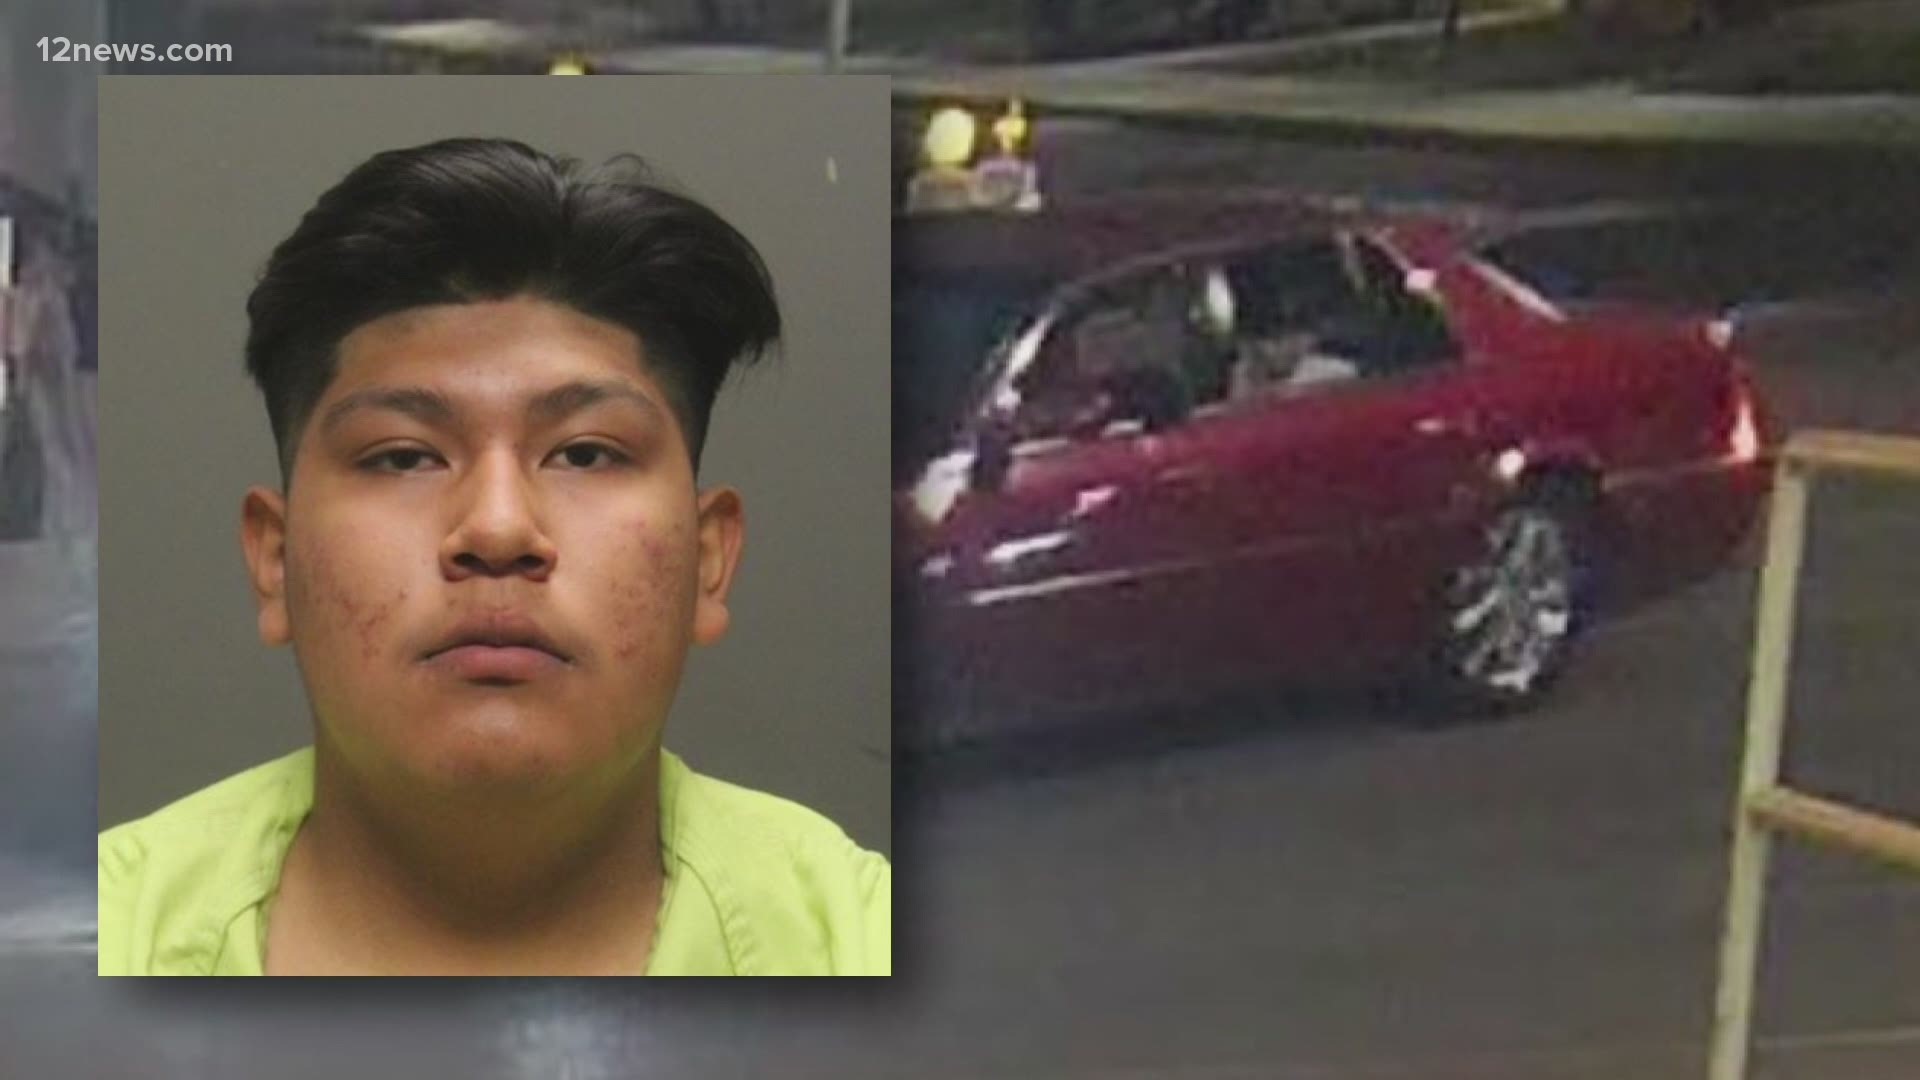 Police arrested 17-year-old Alonzo Orosco in connection to the fatal shooting of a University of Arizona student at a parking garage on campus last weekend.